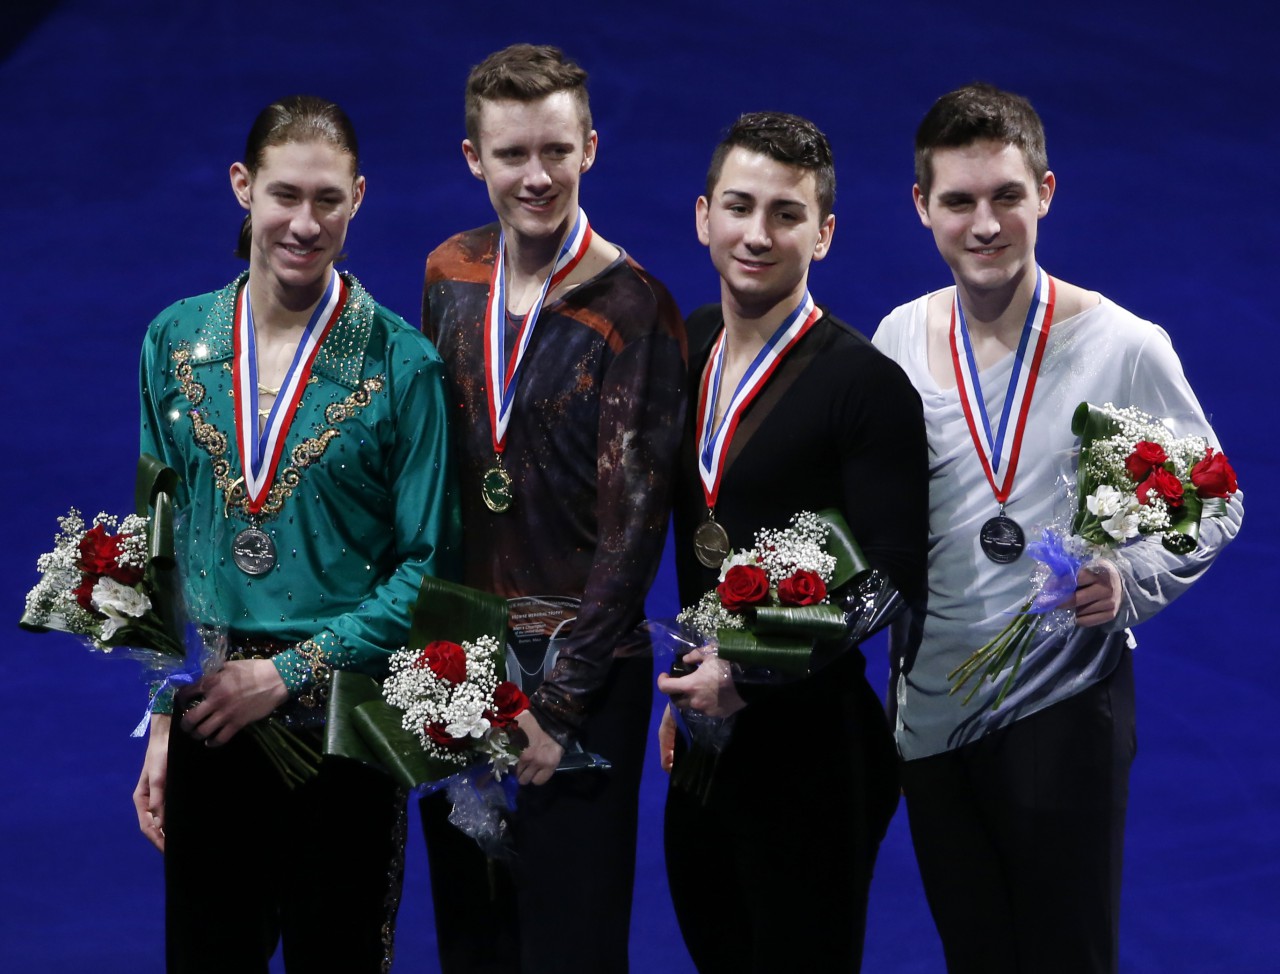 The top four men's skaters, from left, Jason Brown, second place, Jeremy Abbott, first place, Max Aaron, third place, and Joshua Farris pose on the awards stand at the medals ceremony at the U.S. Figure Skating Championships in Boston, Sunday, Jan. 12, 2014. (Elise Amendola/AP)